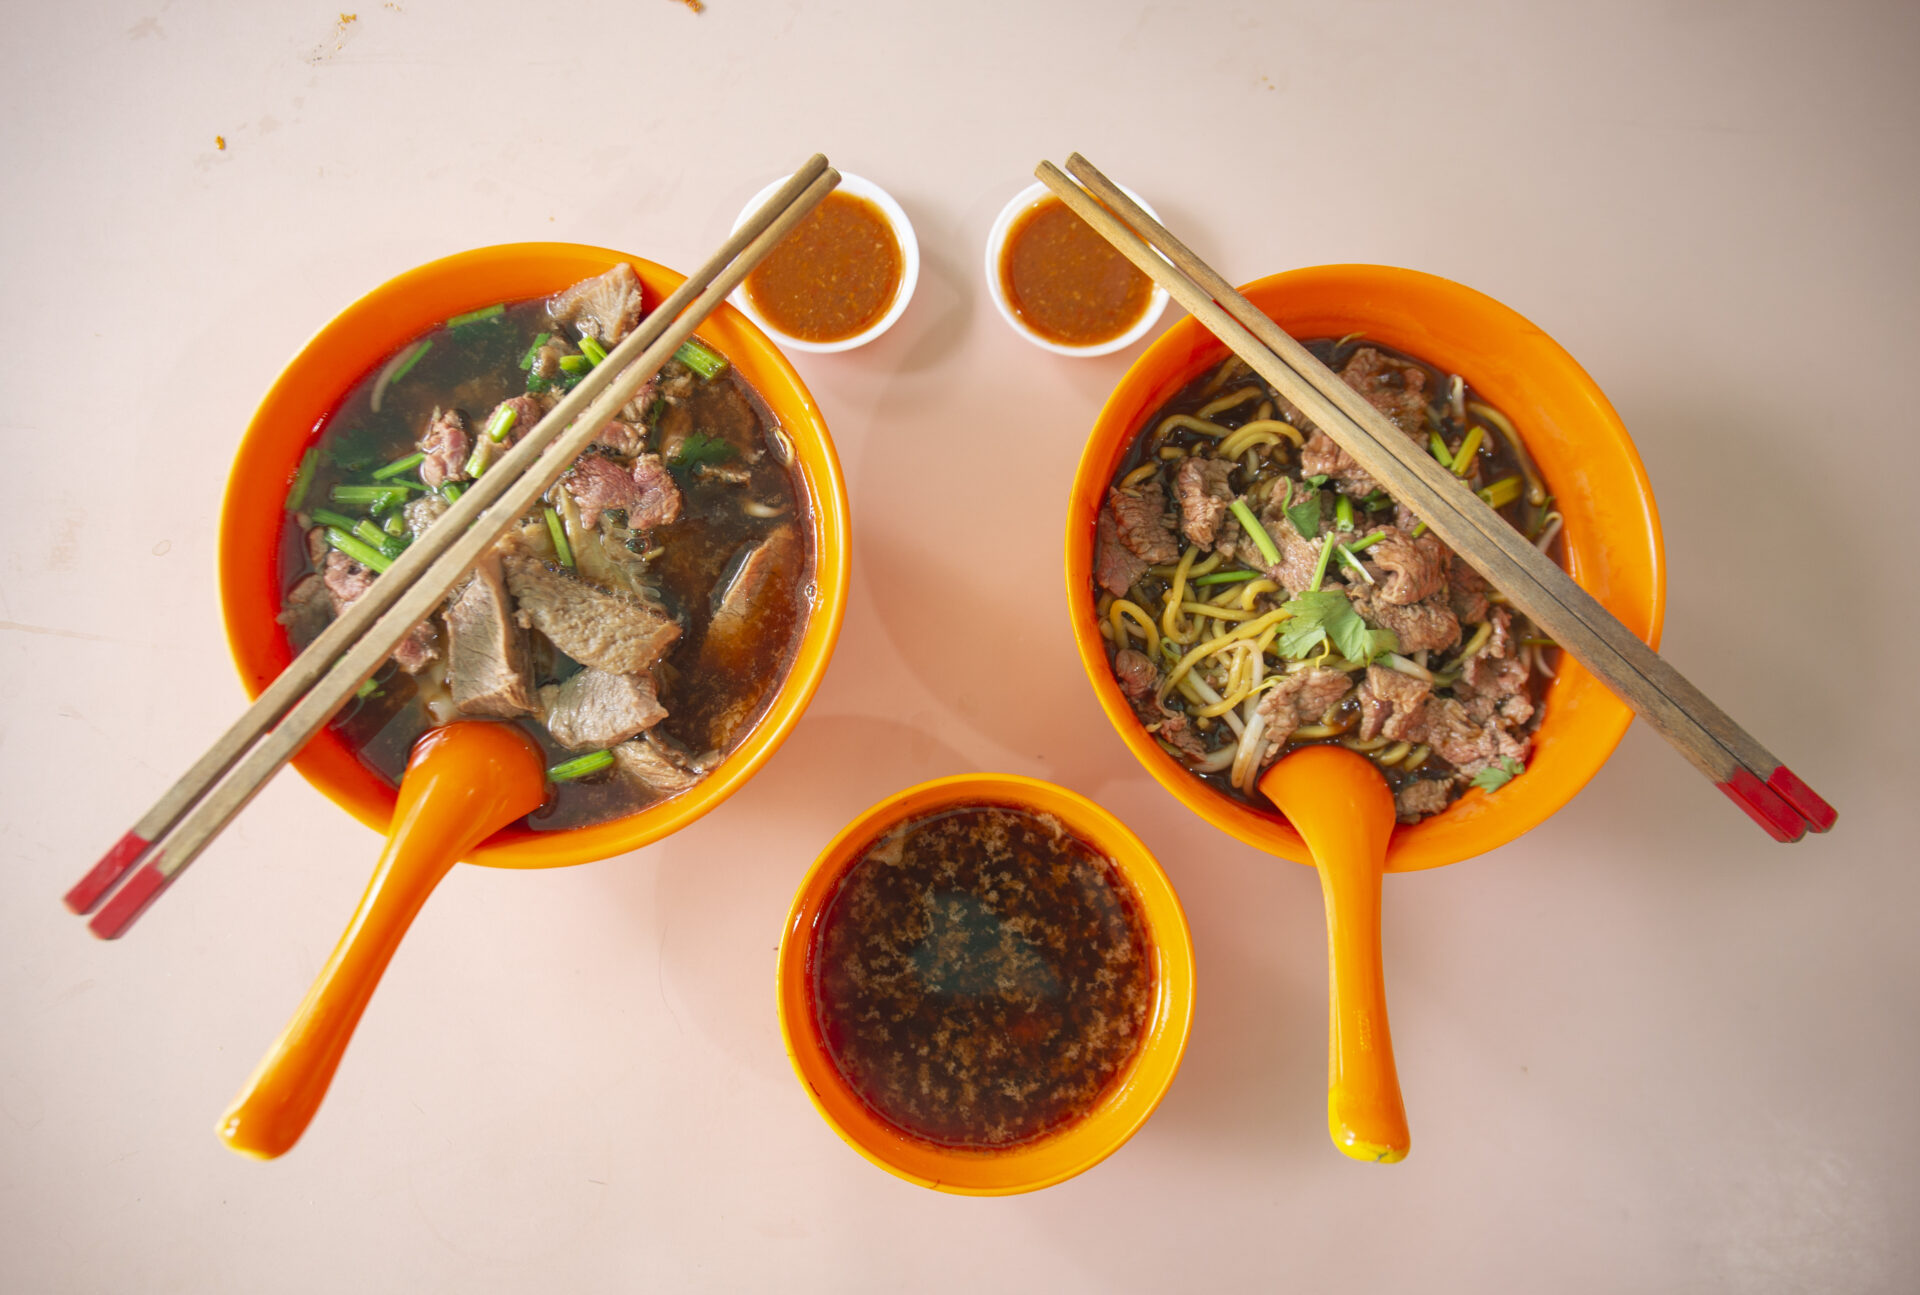 Kim Huat Teochew Beef Noodles - Overall